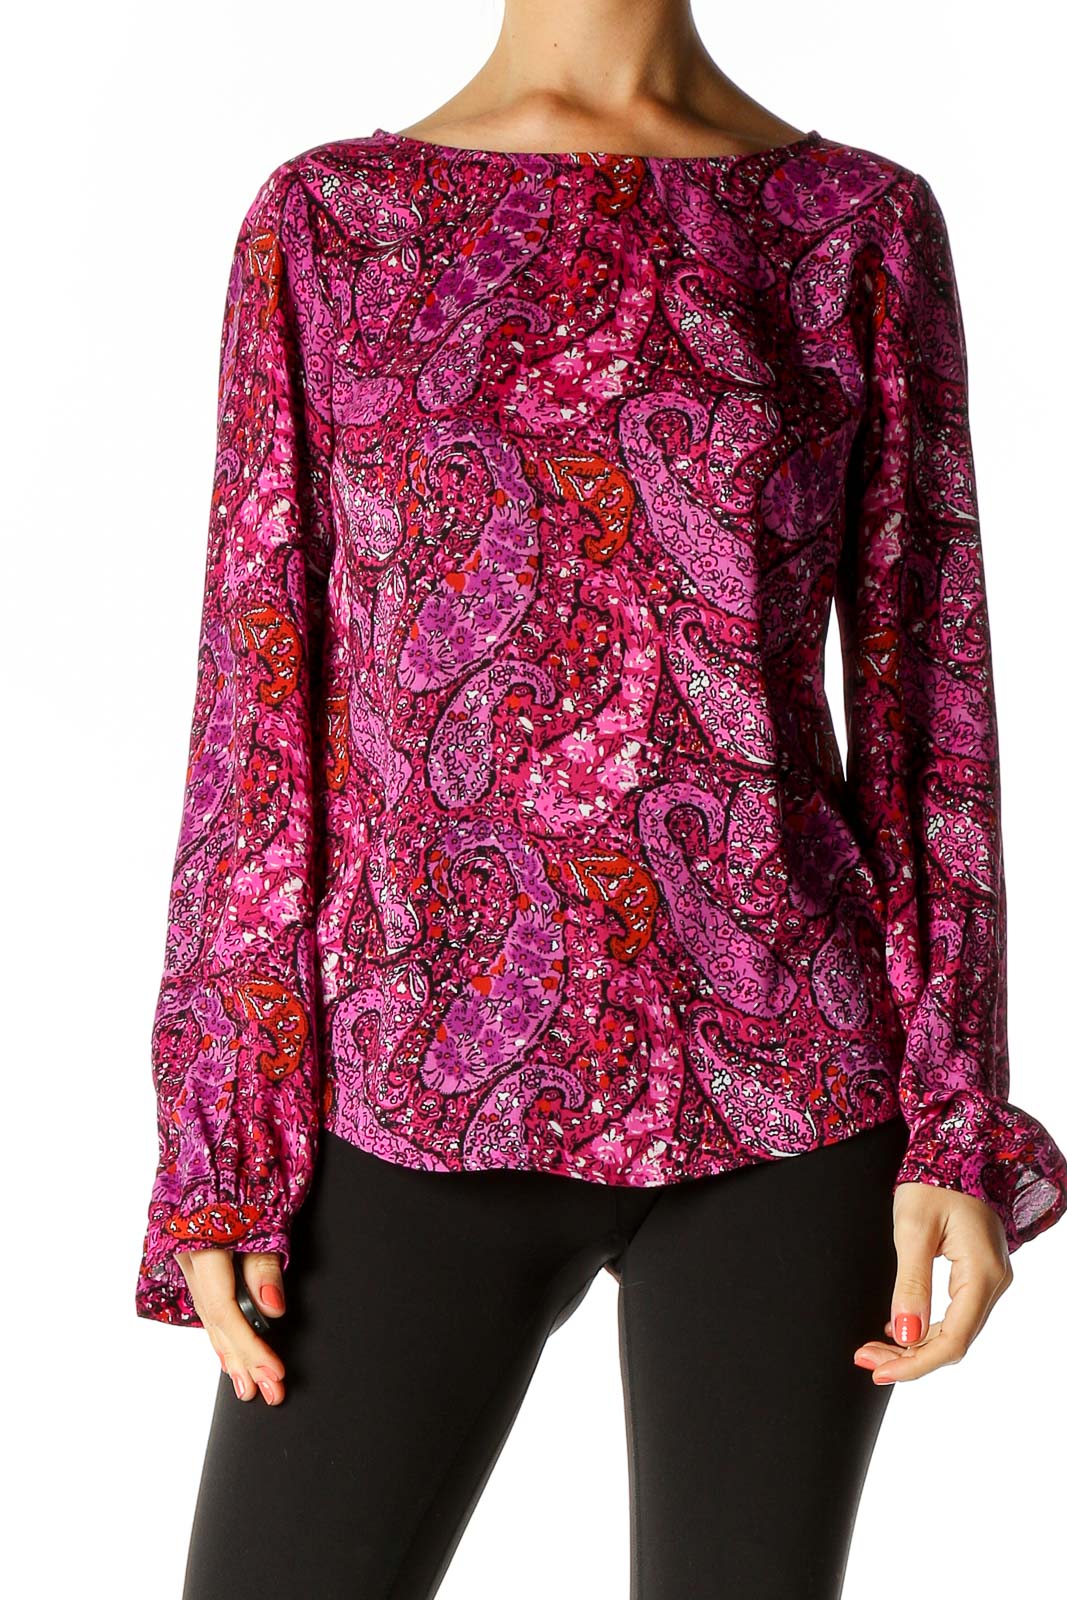 Red Paisley Retro Blouse Front